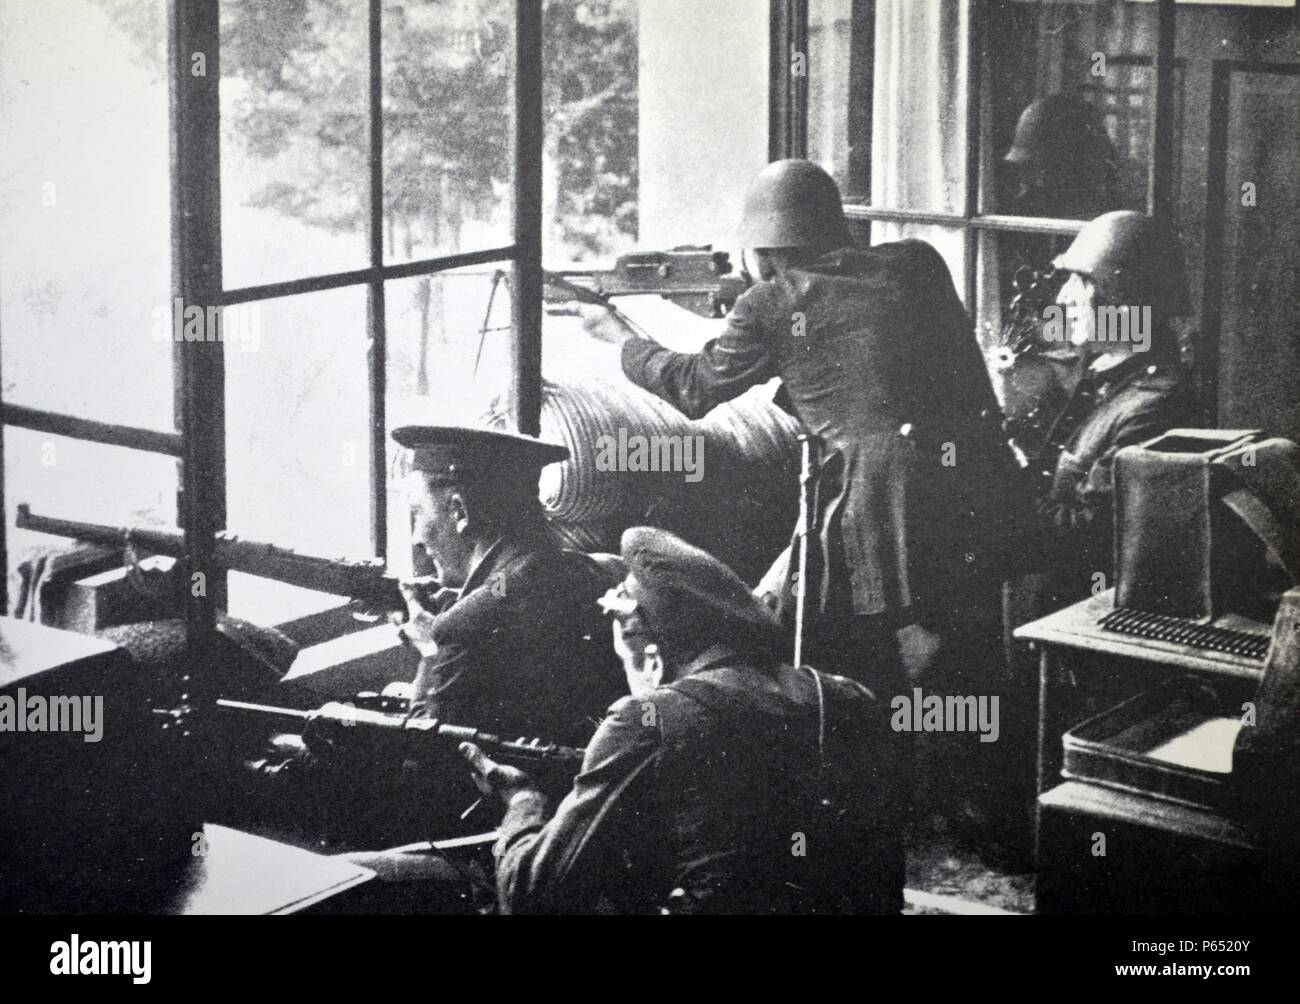 republican soldiers fire from a building during the Spanish civil war, Barcelona 1937 Stock Photo